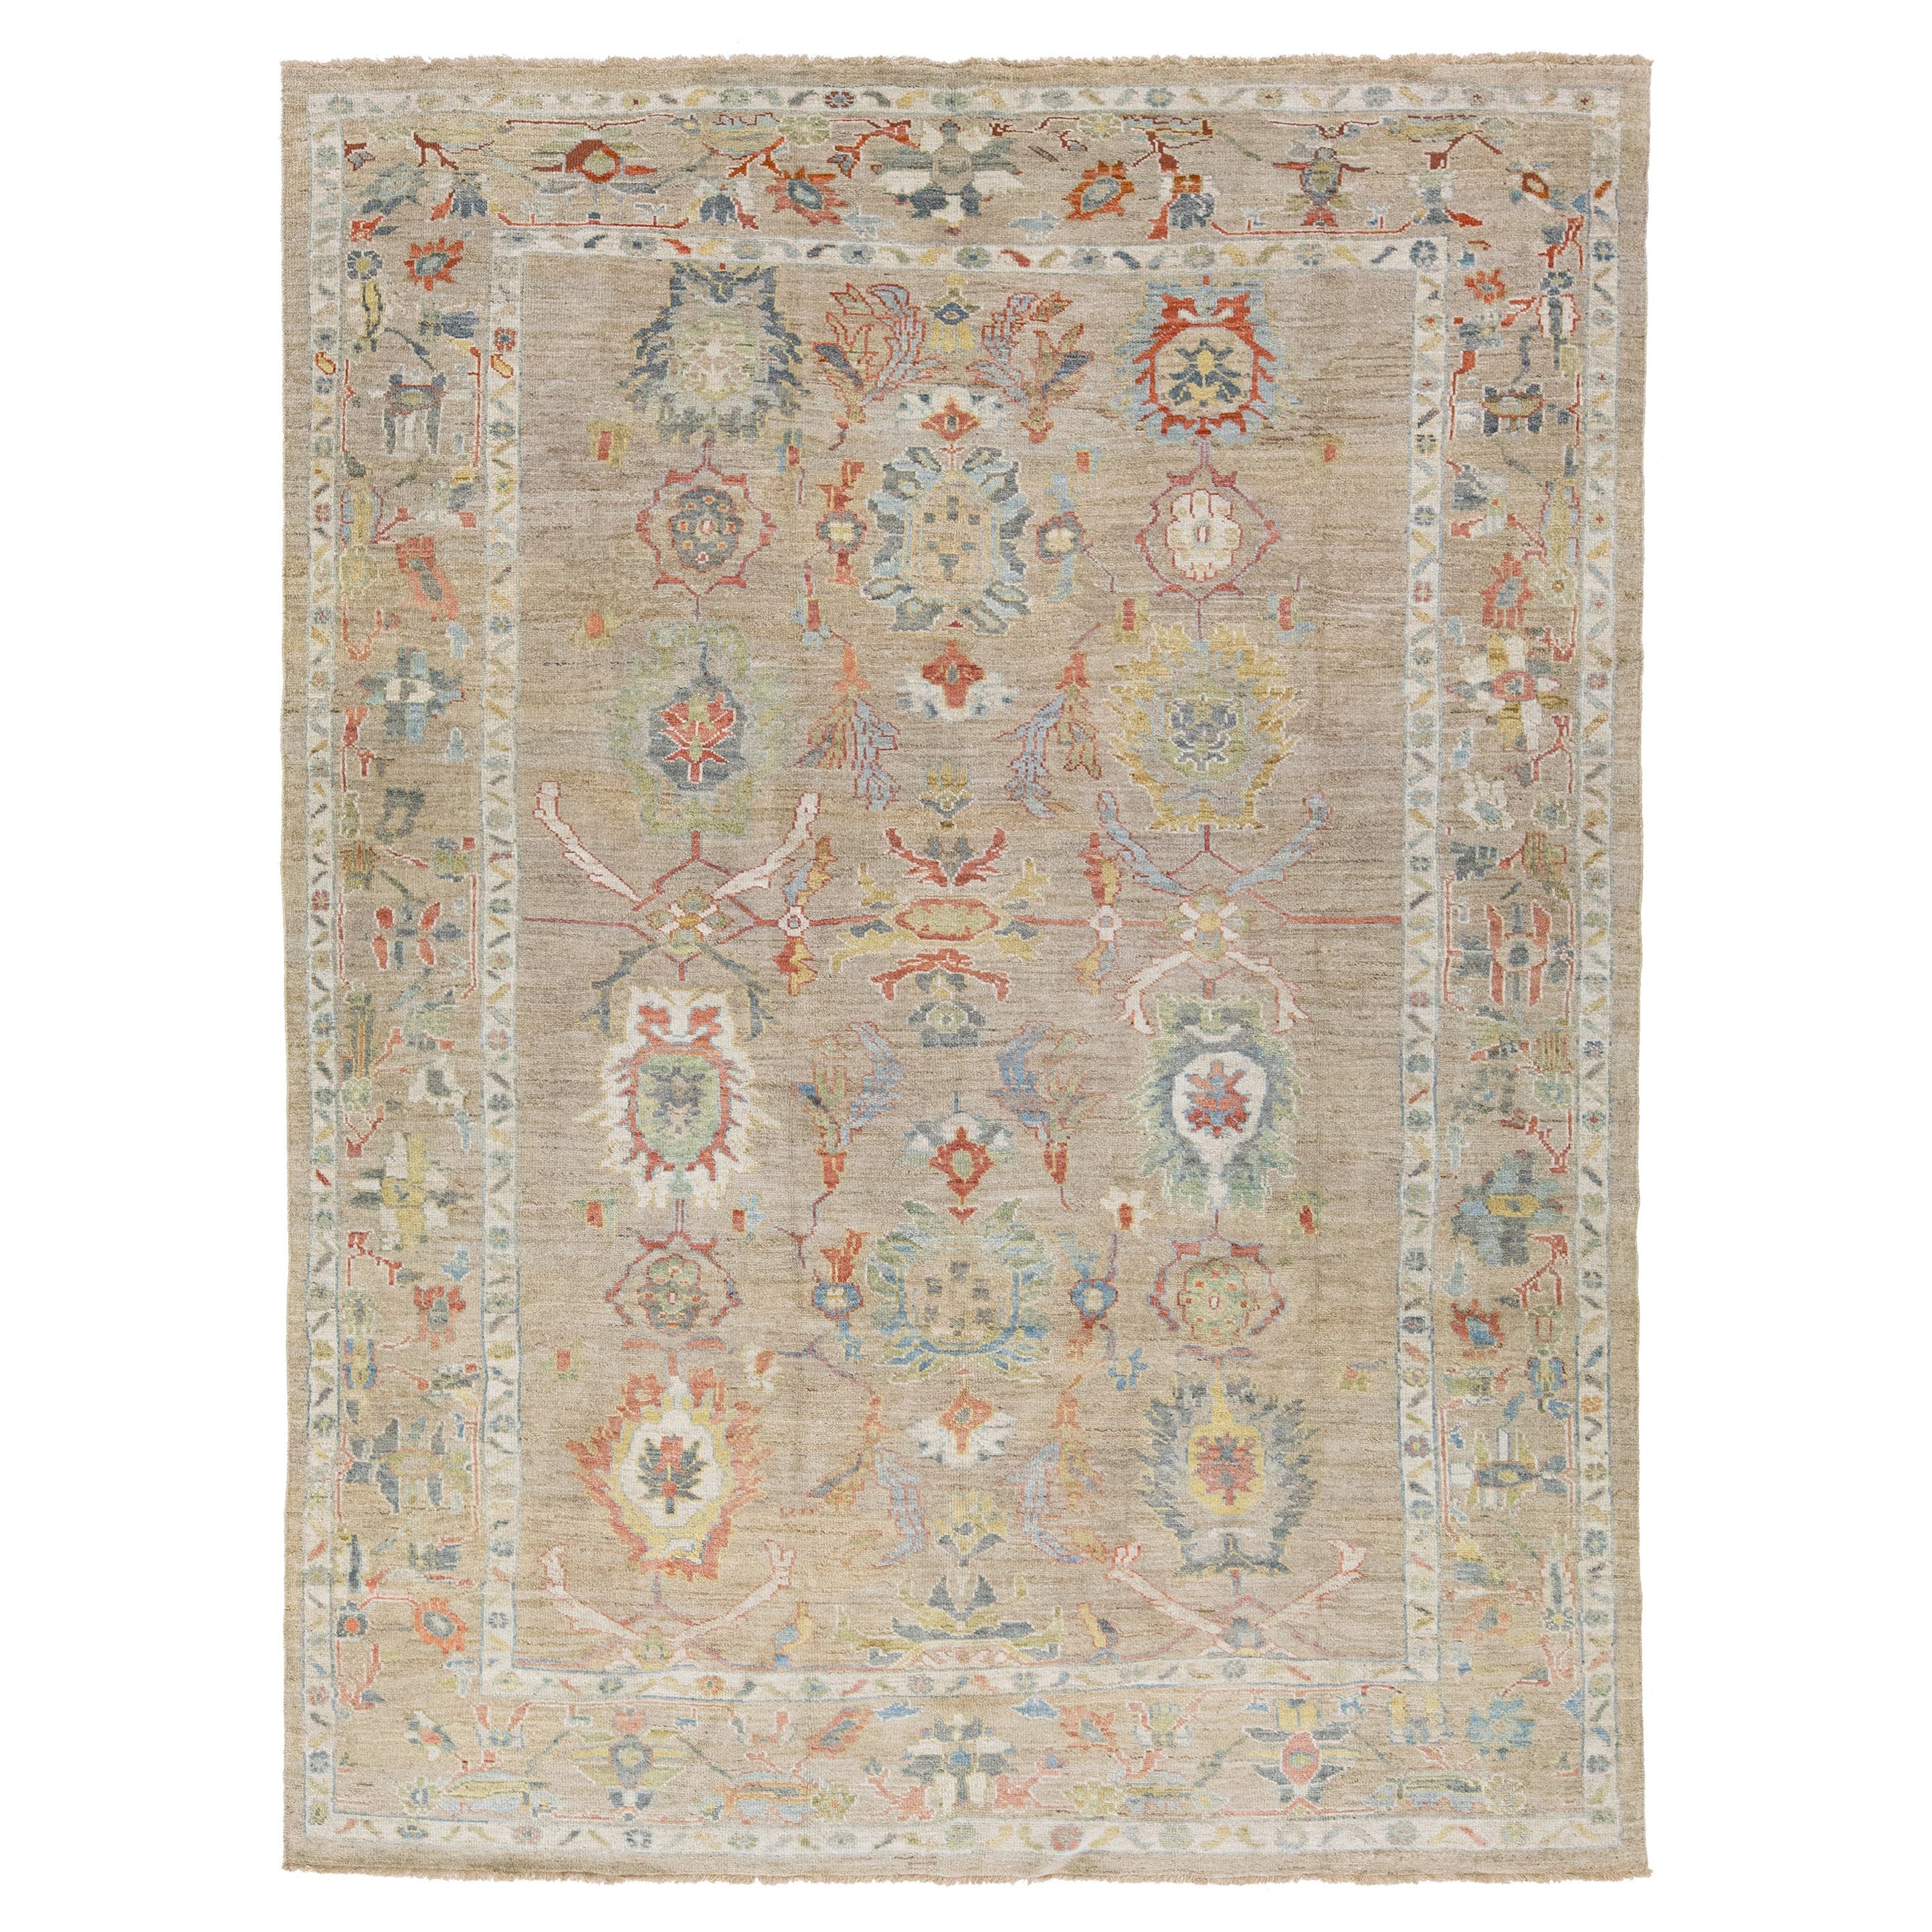 Modern Sultanabad Handmade Brown oom Size Wool Rug Allover Floral For Sale